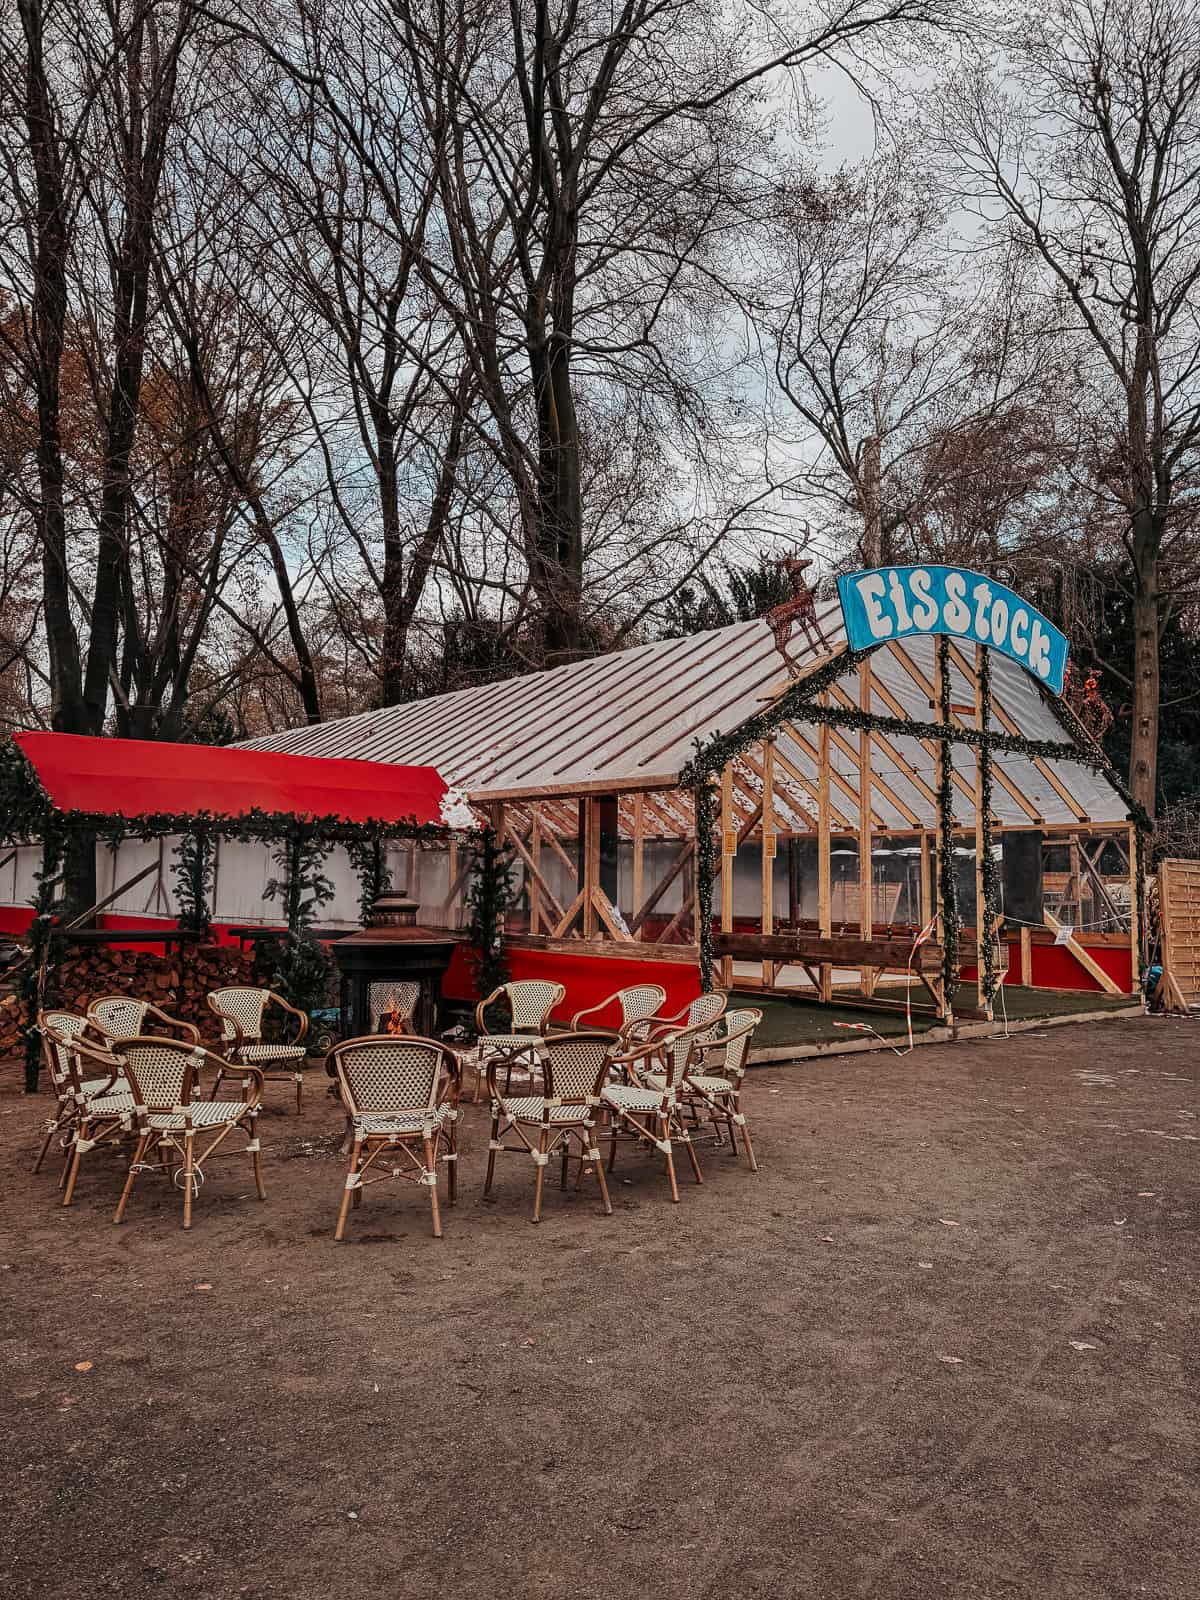 A quaint outdoor café with wicker chairs and red accents, set in a serene park setting during winter. The café appears closed, adding a peaceful contrast to the surrounding bare trees.